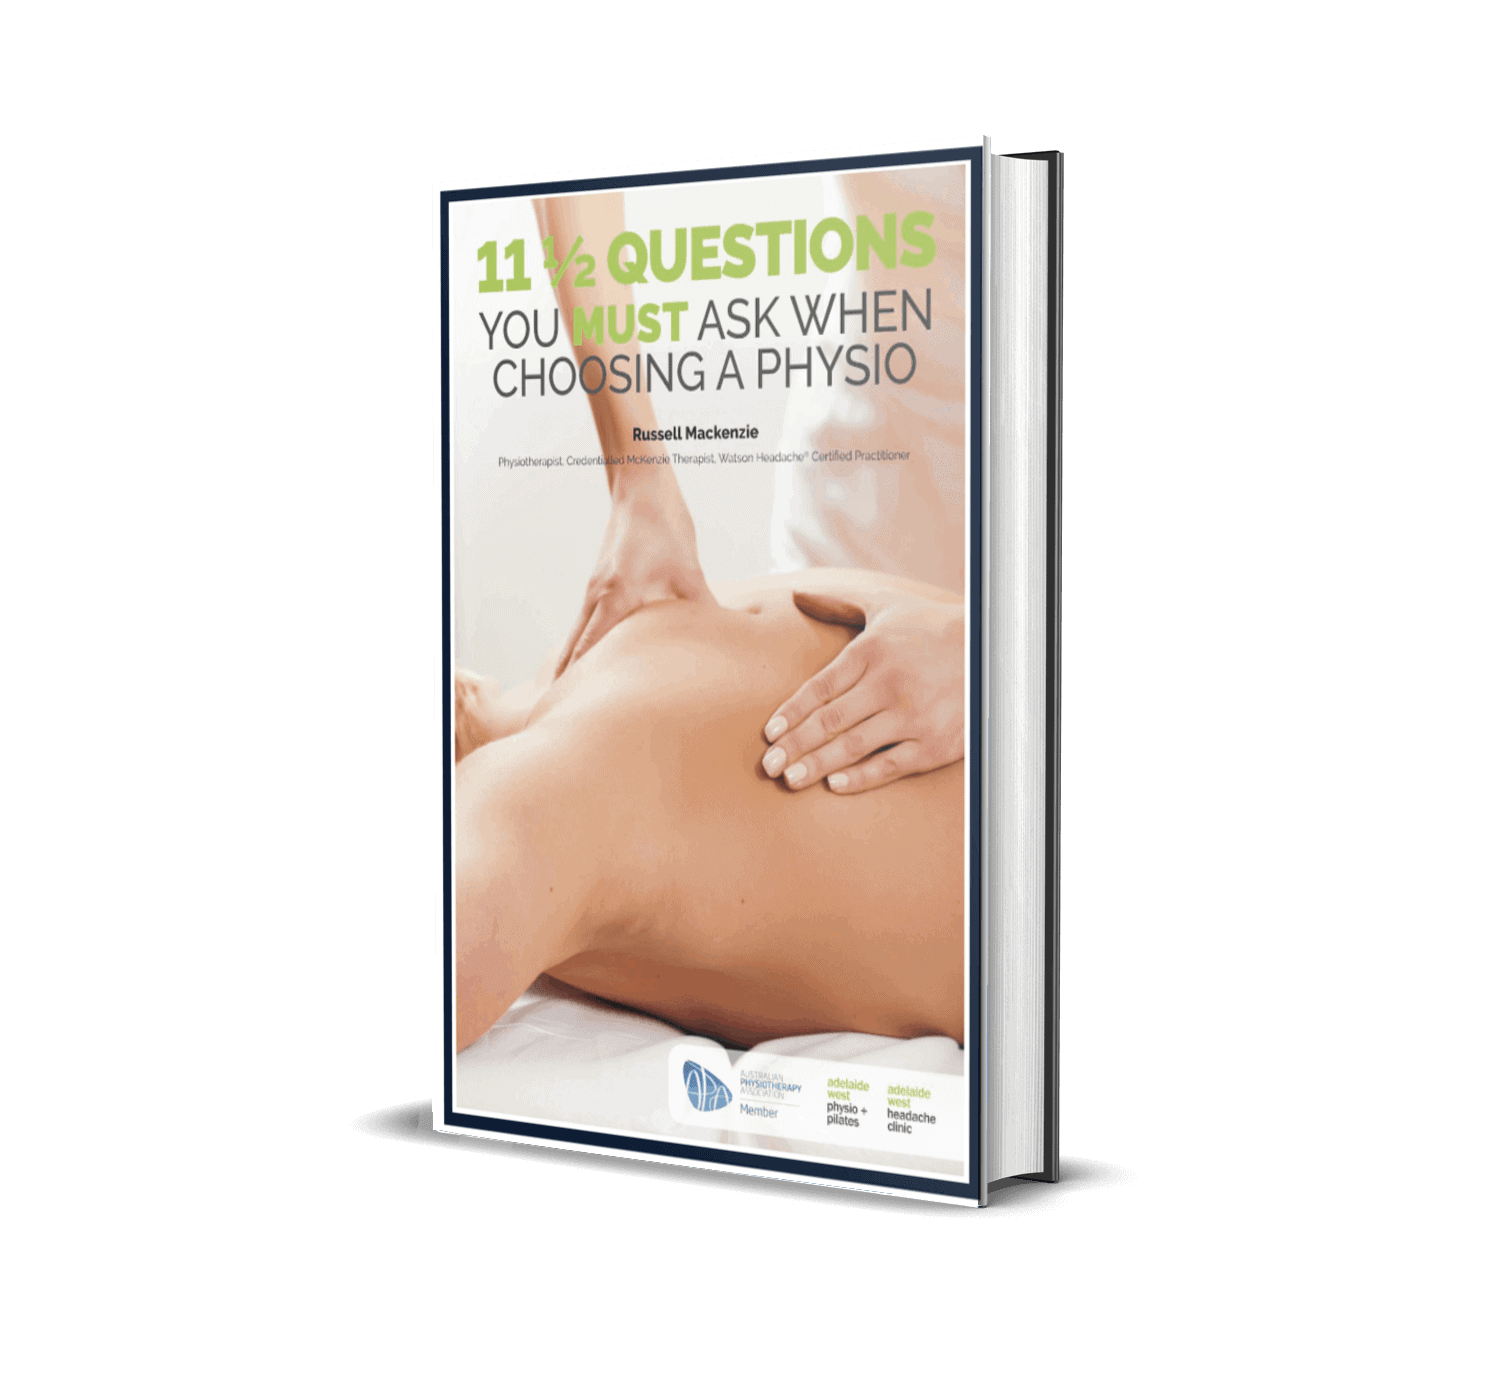 11 1/2 Things You MUST Ask Before Choosing A Physio: Free Patient Resources - Adelaide West Physio + Pilates | Headache Clinic